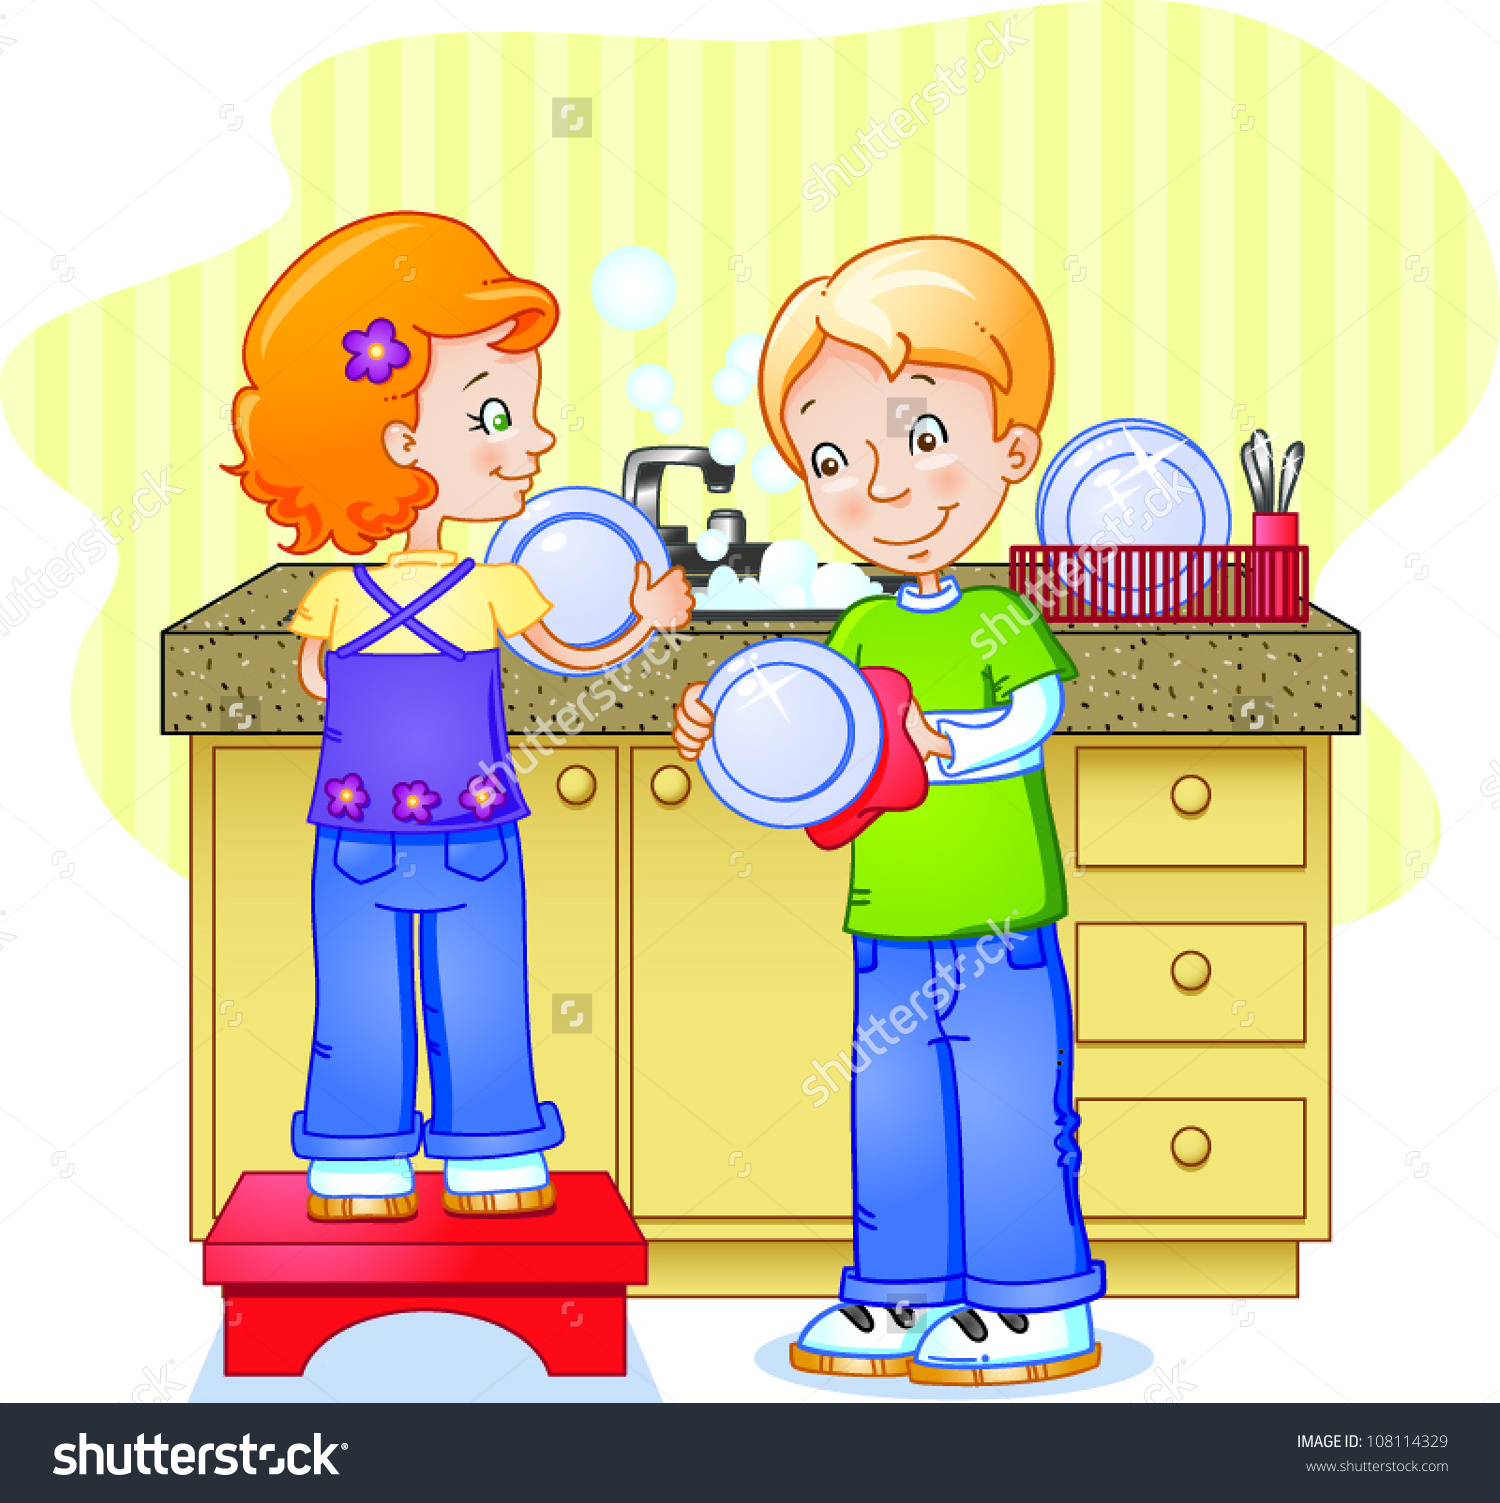 brother clipart working